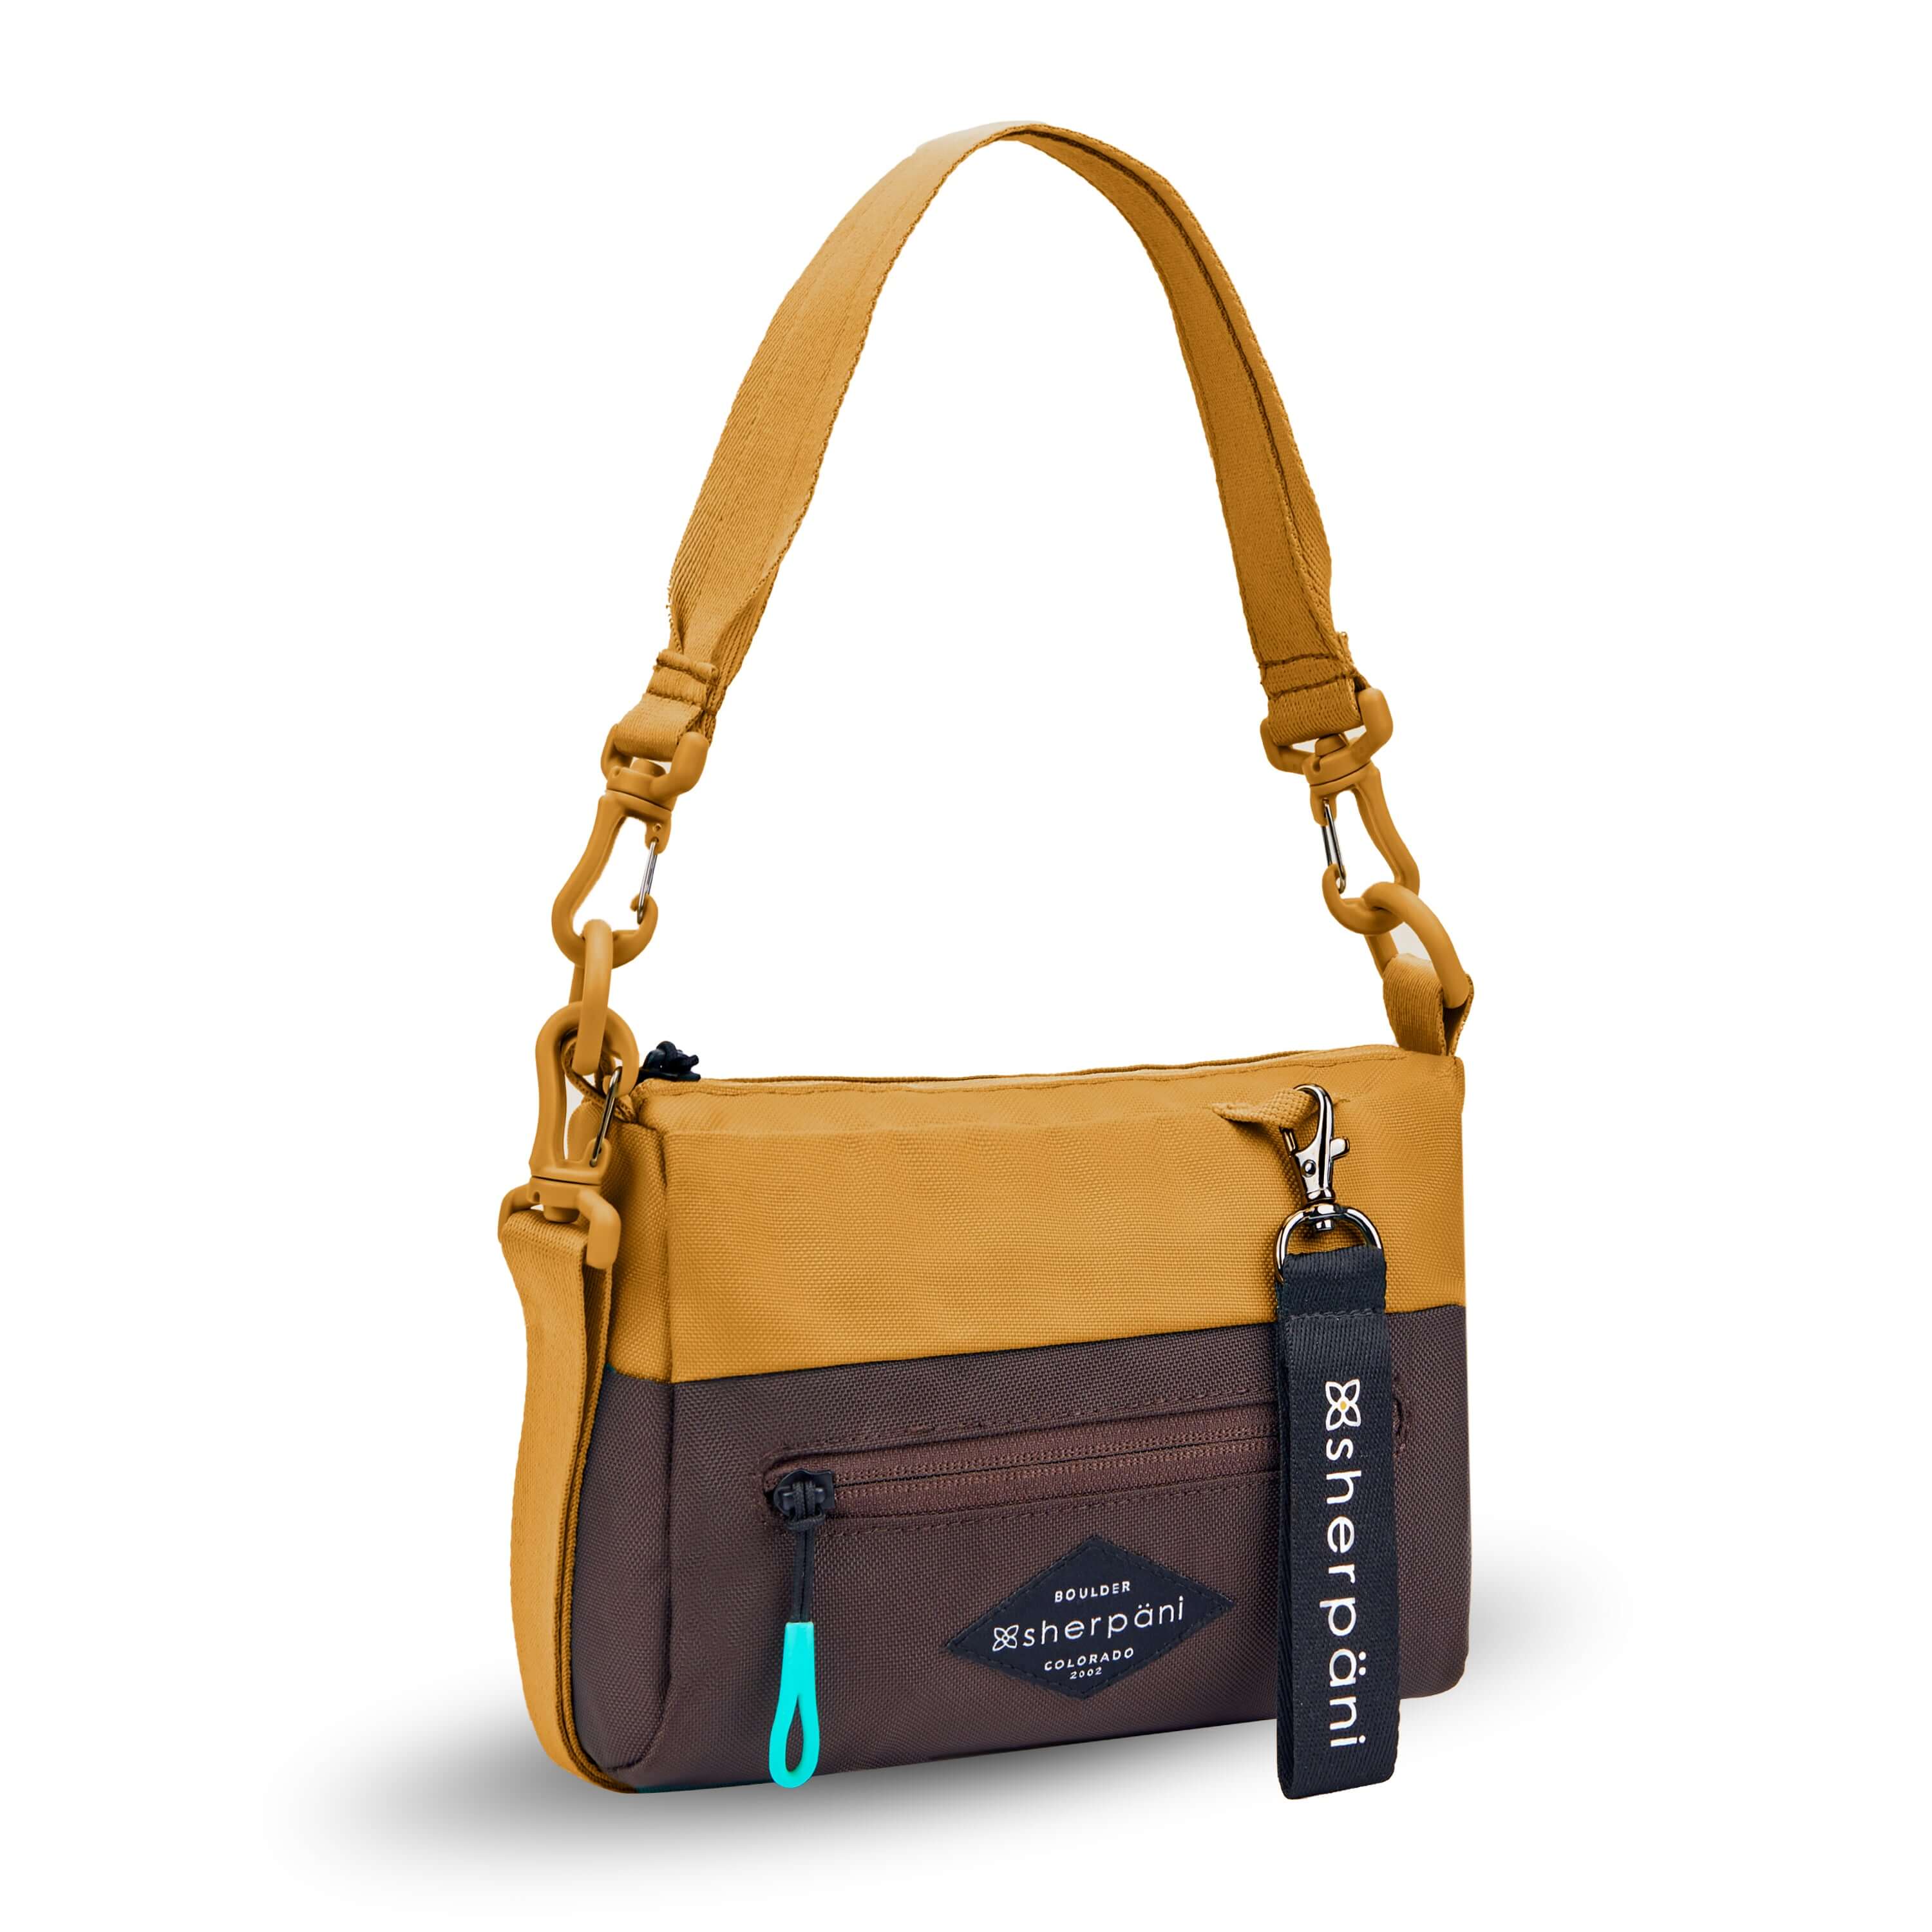 Angled front view of Sherpani's purse, the Skye in Sundial. It is two toned, the top half of the bag is burnt yellow and the bottom half of the bag is brown. There is an external zipper compartment with an easy pull zipper accented in aqua. There is a branded Sherpani keychain clipped to the upper right corner. The bag has a detachable short strap and a longer detachable/adjustable crossbody strap. #color_sundial v1